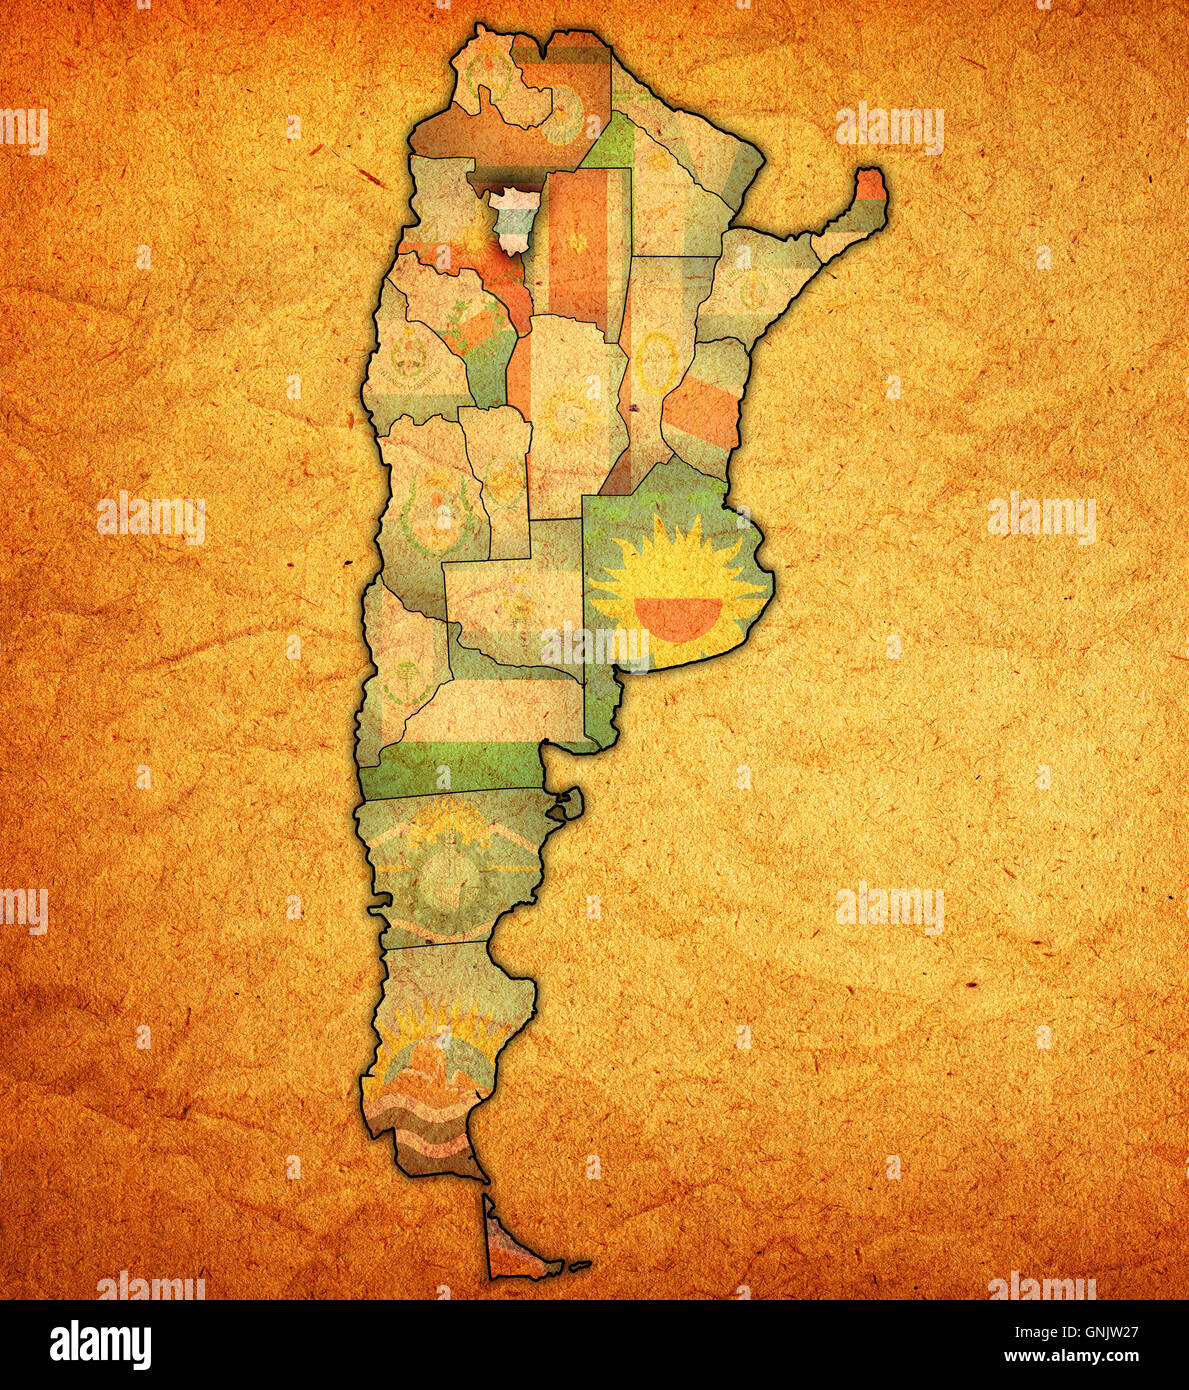 tucuman region with flag on map of administrative divisions of argentina Stock Photo